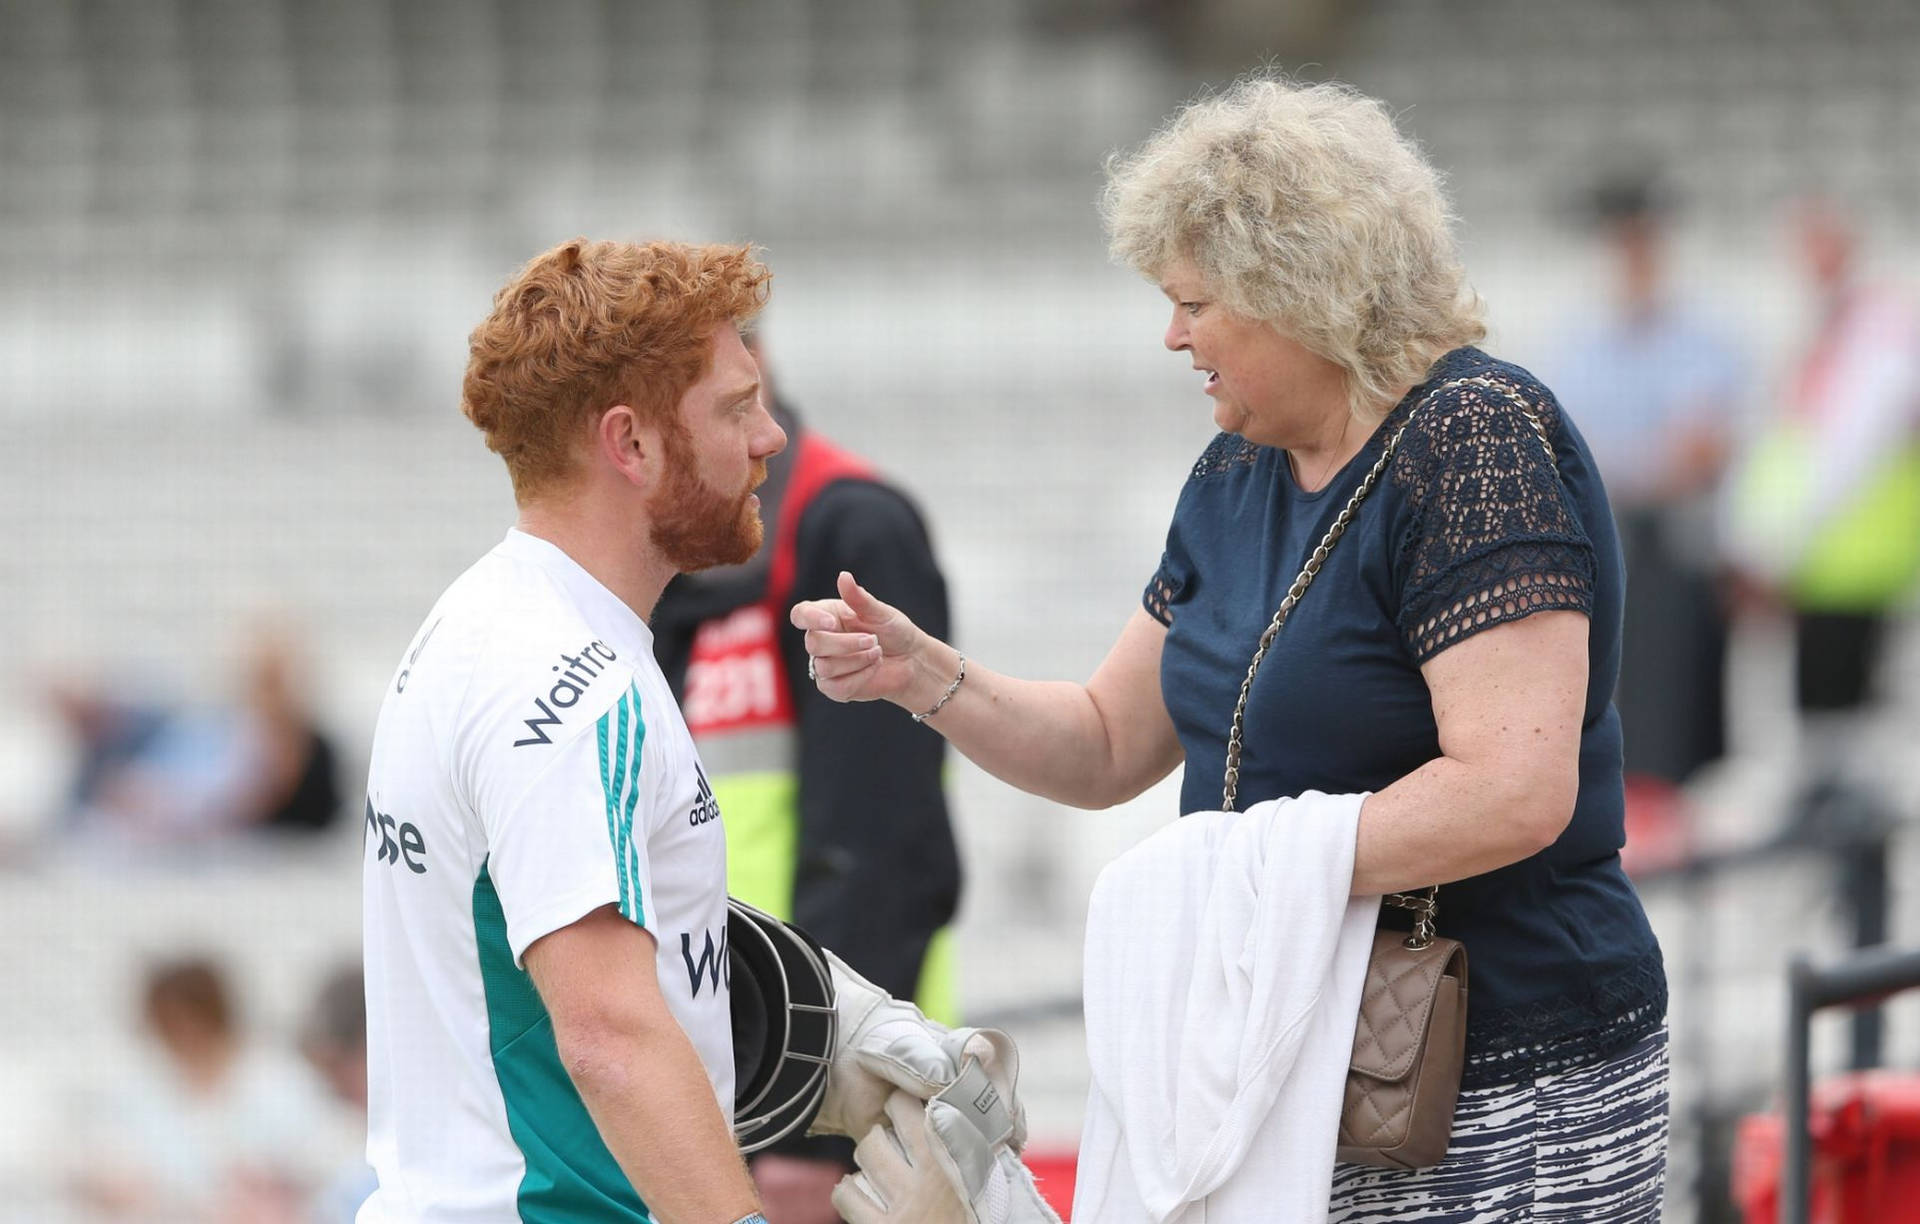 Cricketer Jonny Bairstow Sharing A Sweet Moment With His Mother Background